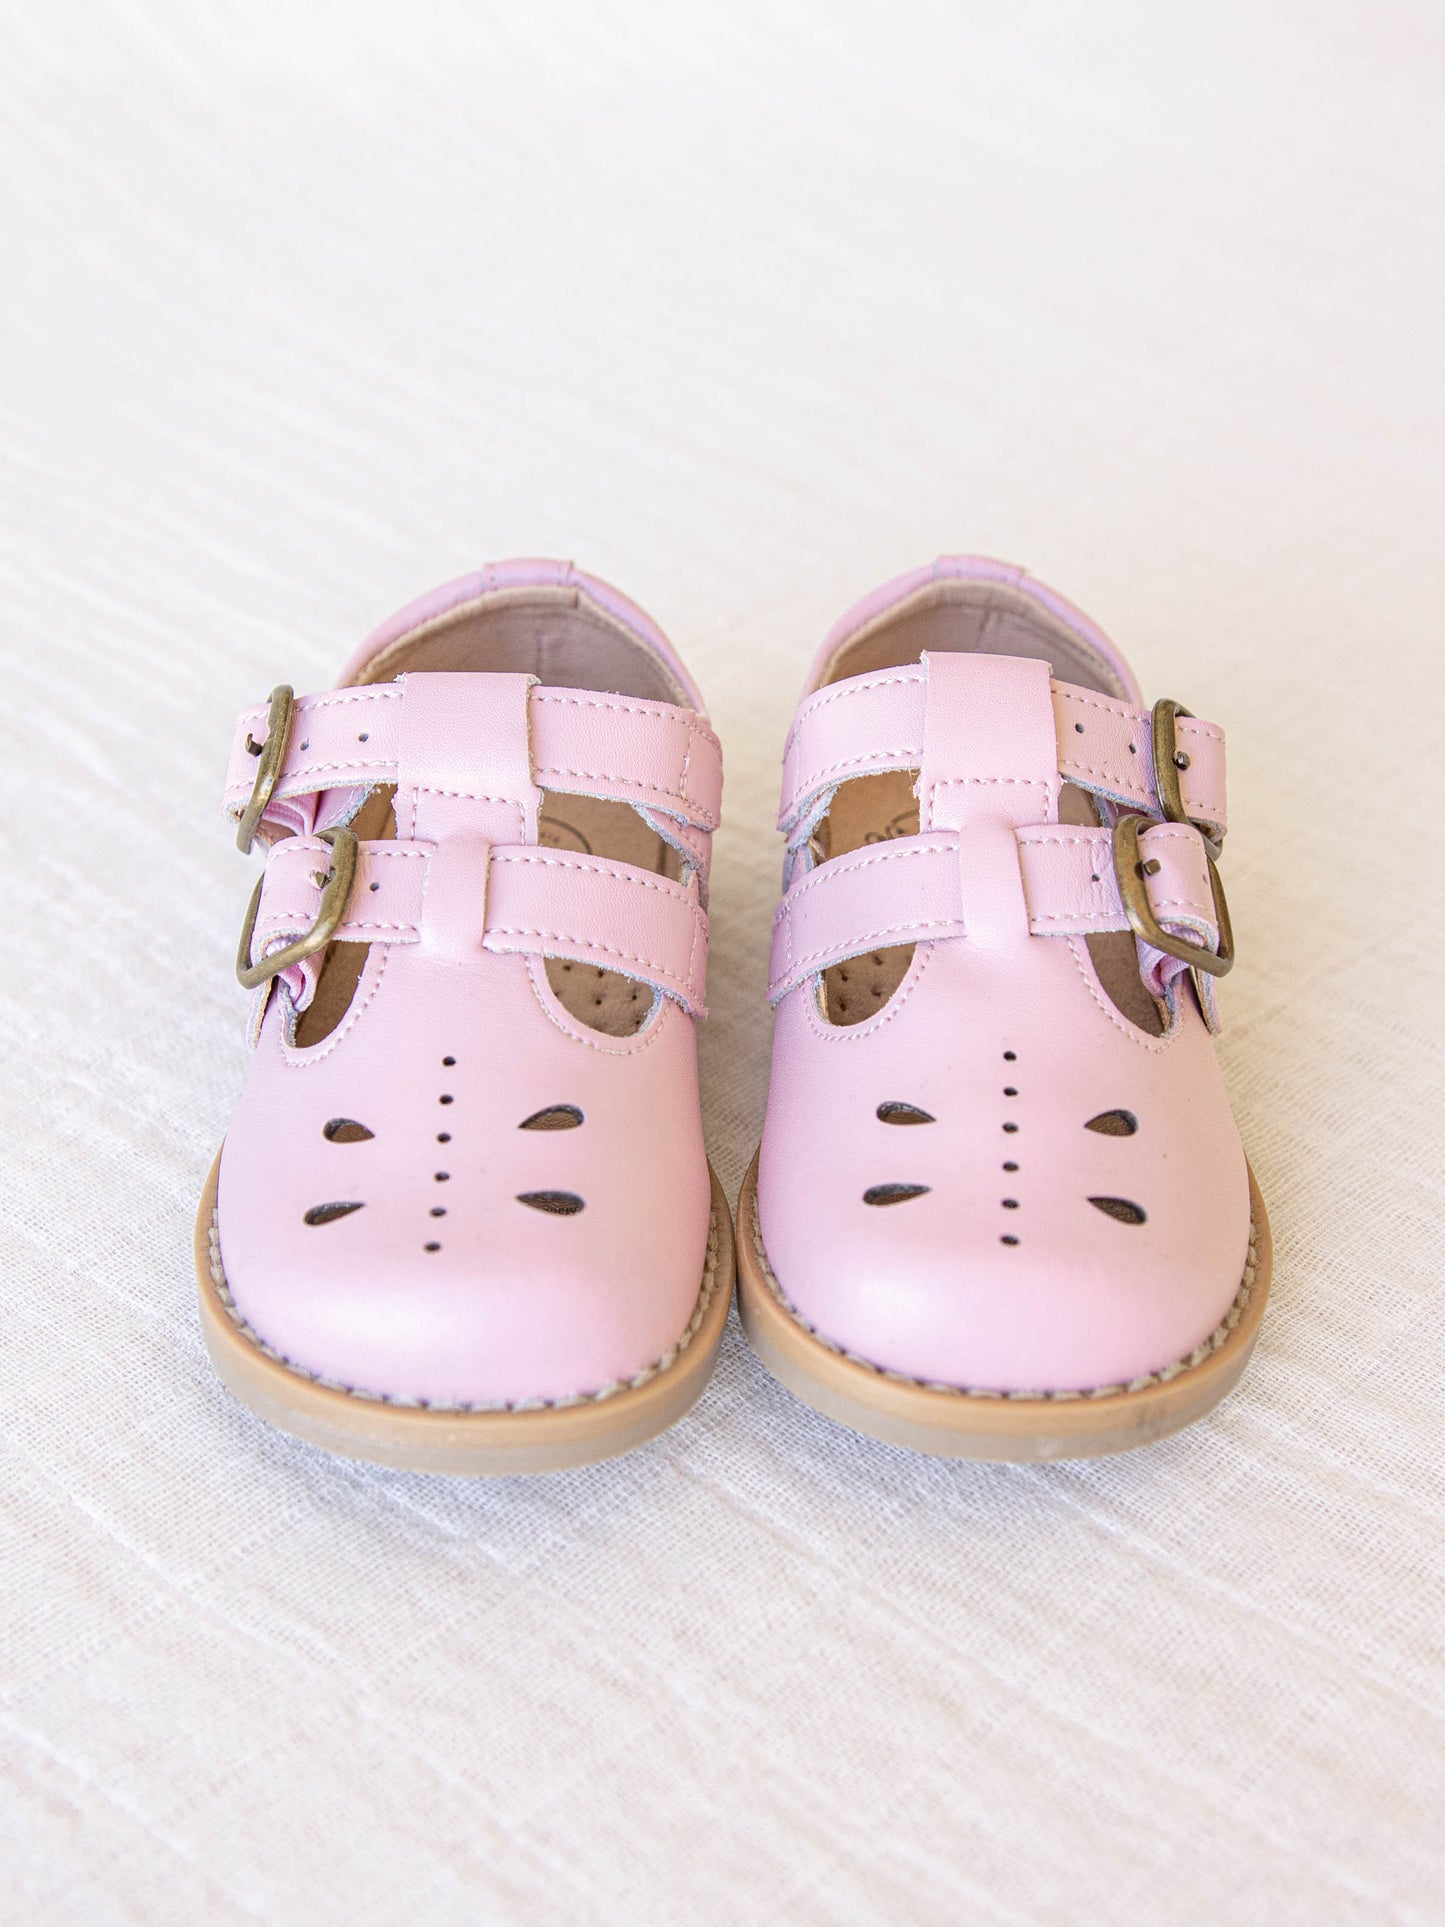 A pair of light pink colored genuine leather rubber soled shoes with two adjustable metal buckles and cut out detail across the toe area in a dragonfly type pattern. 